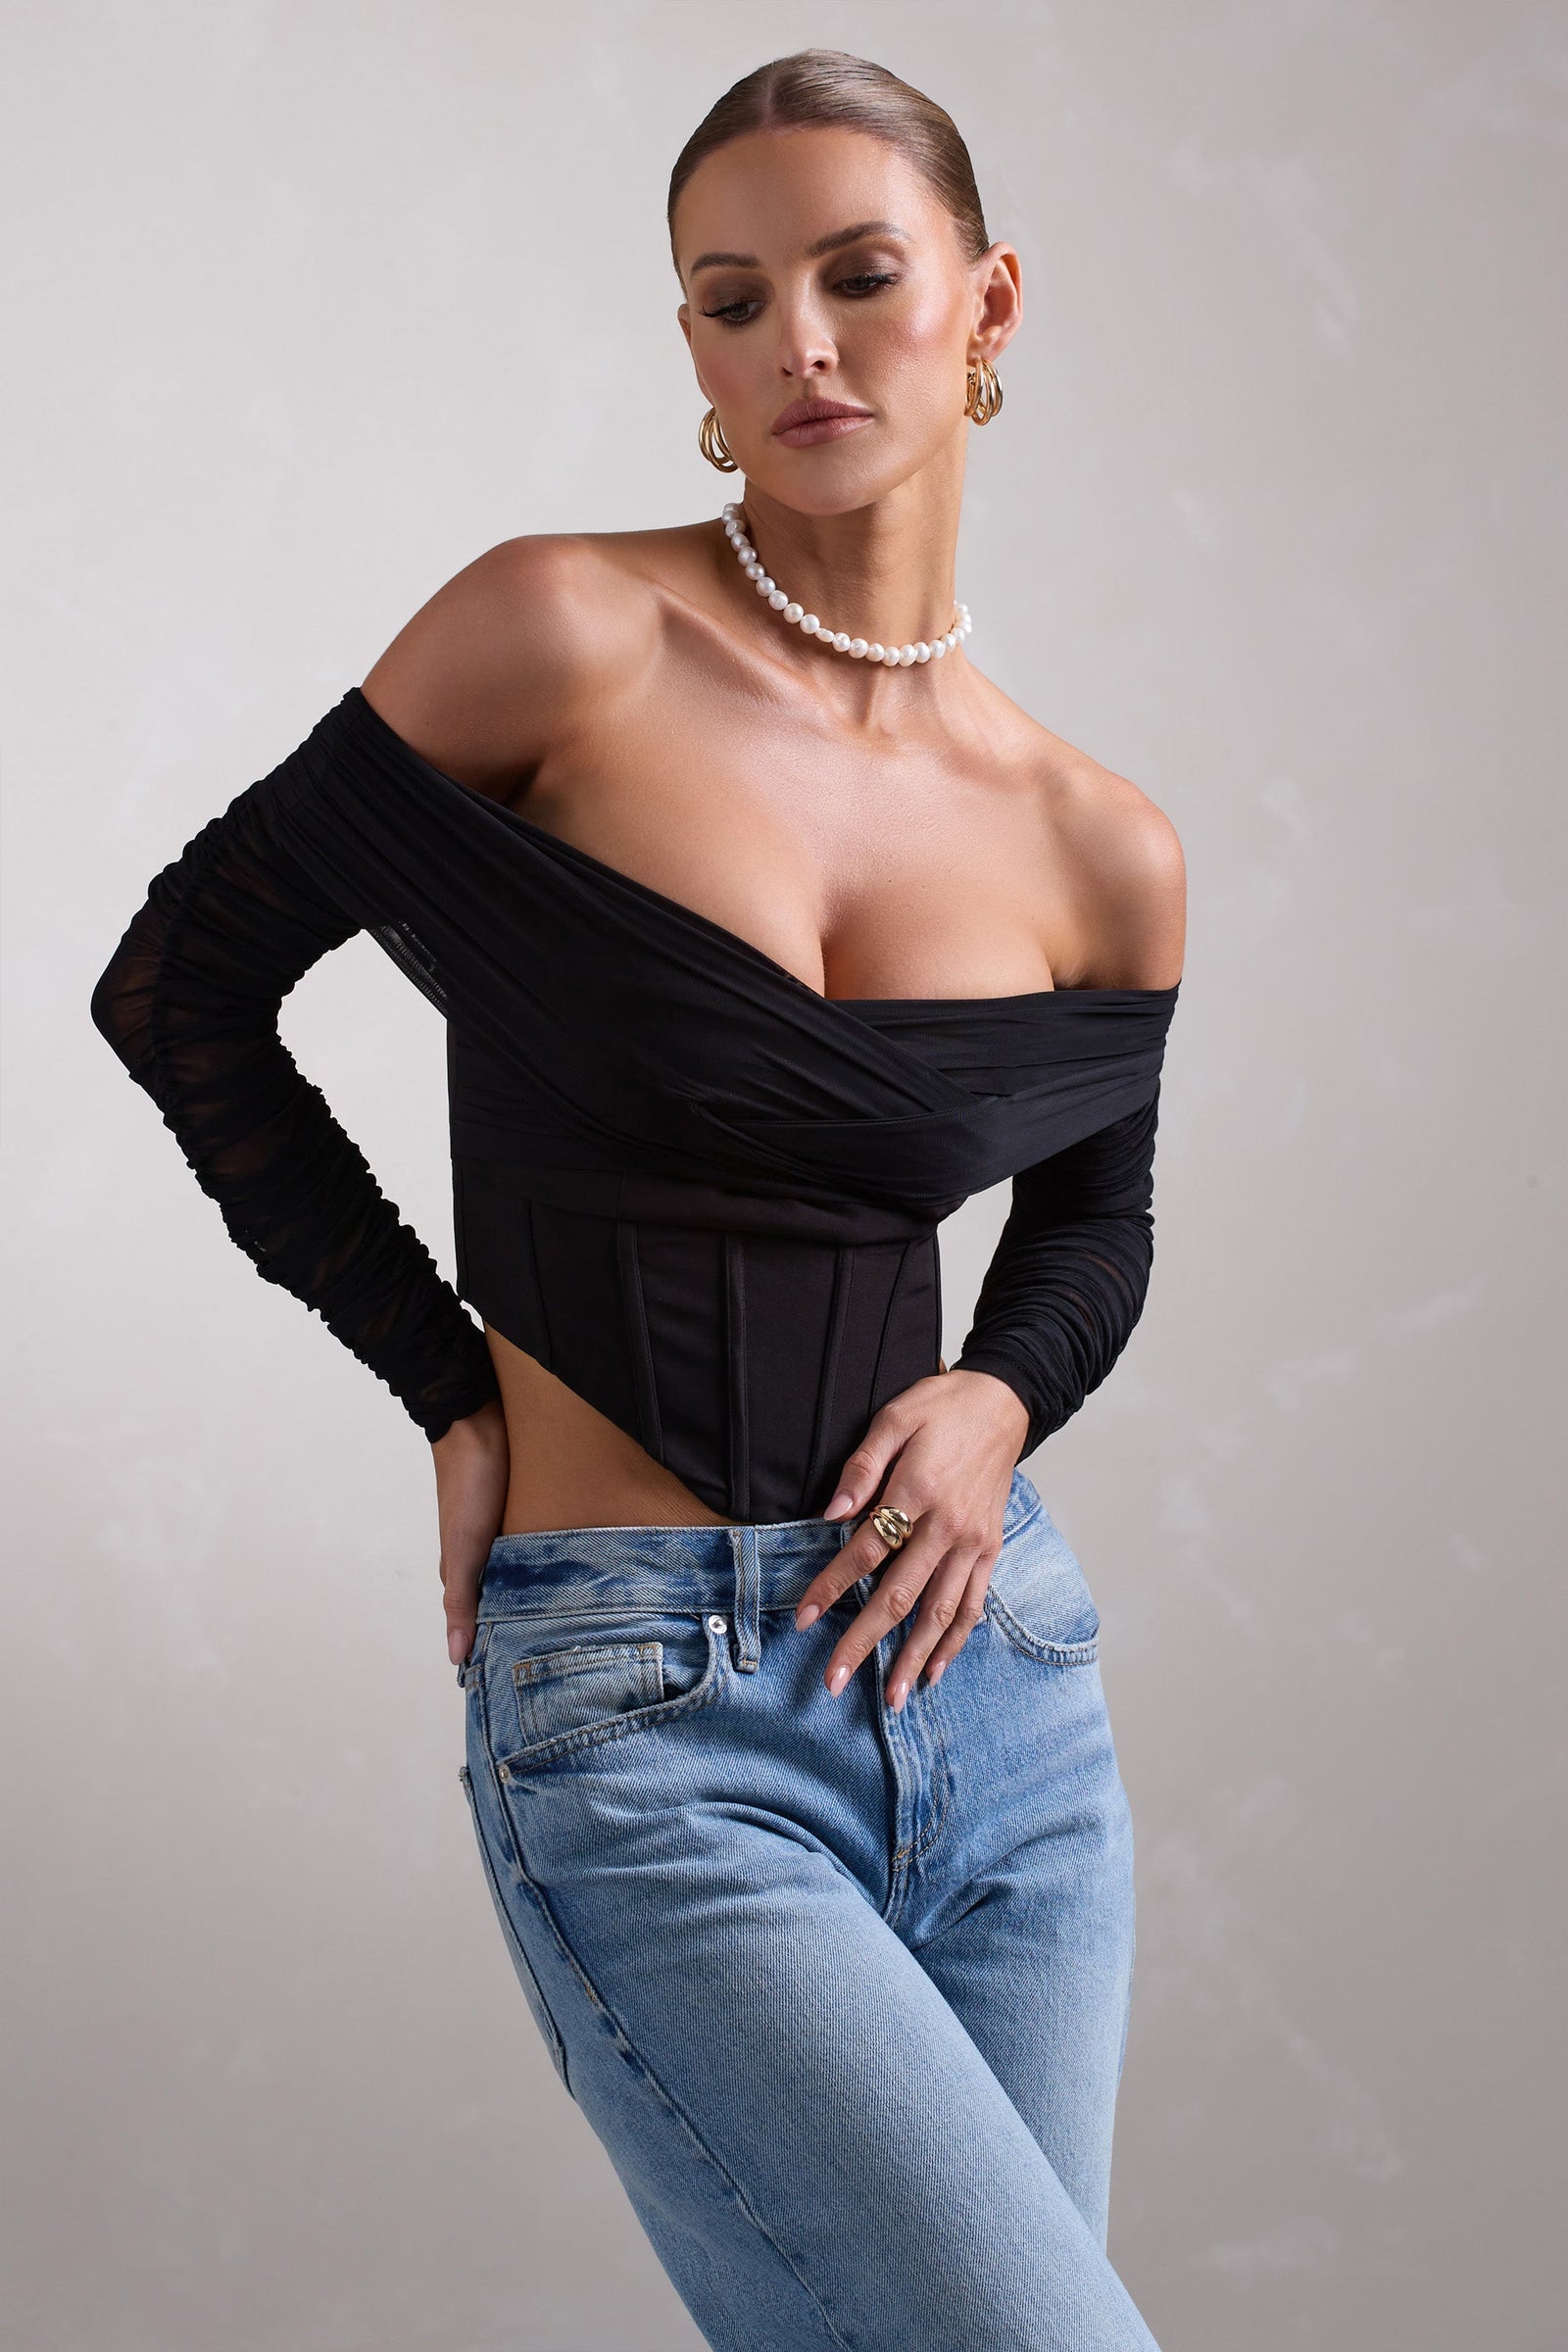 All About You Black Feather Bandeau Corset Top – Club L London - USA